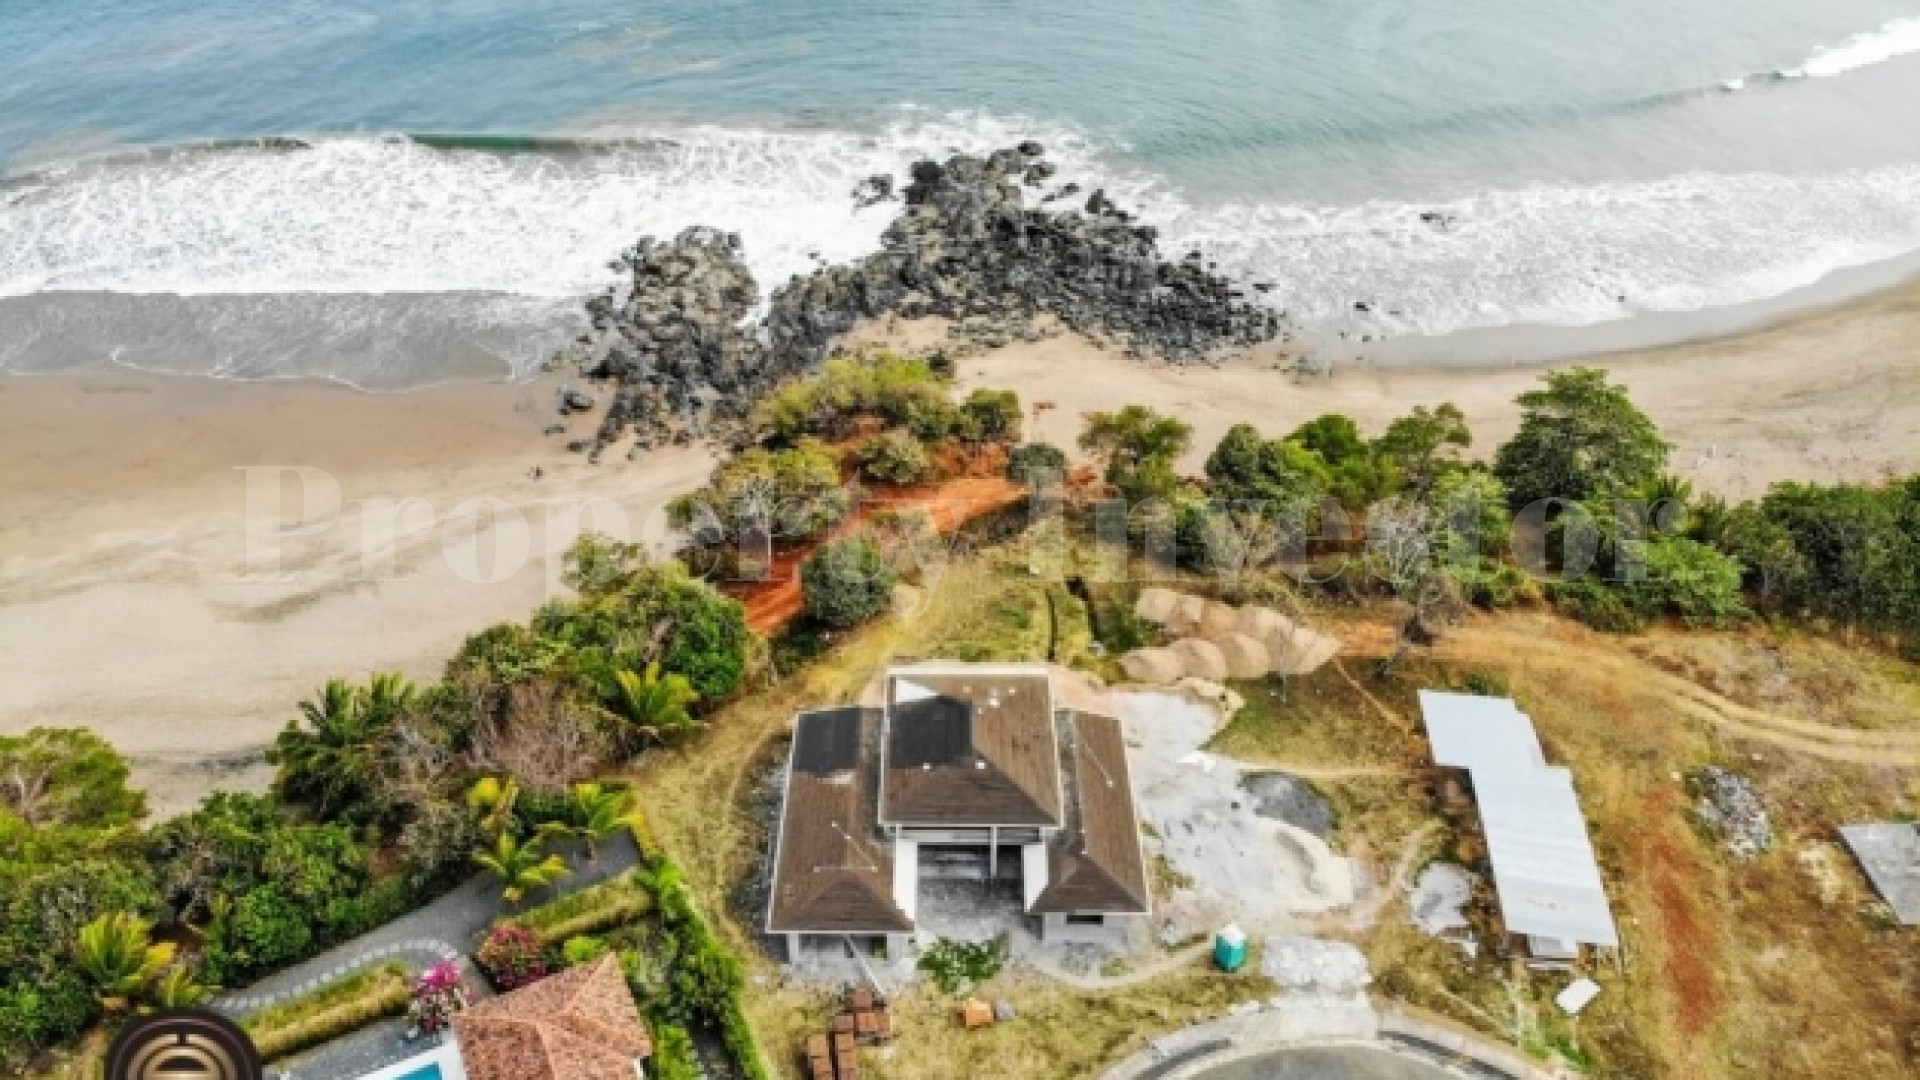 Unfinished 3 Bedroom Beachfront Home for Sale in Pedasi, Panama